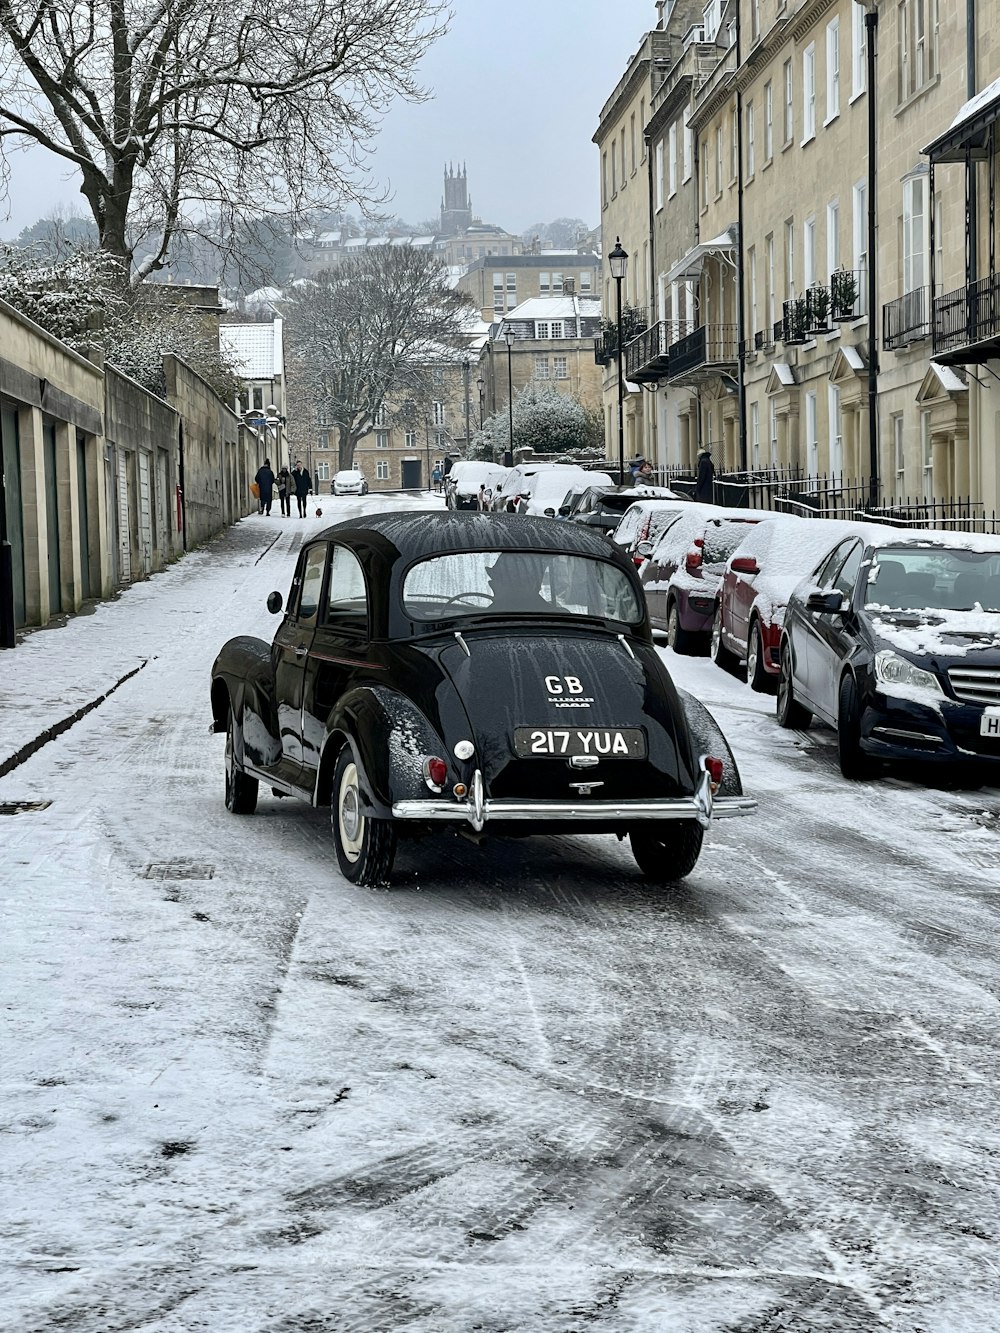 a black car is parked on a snowy street